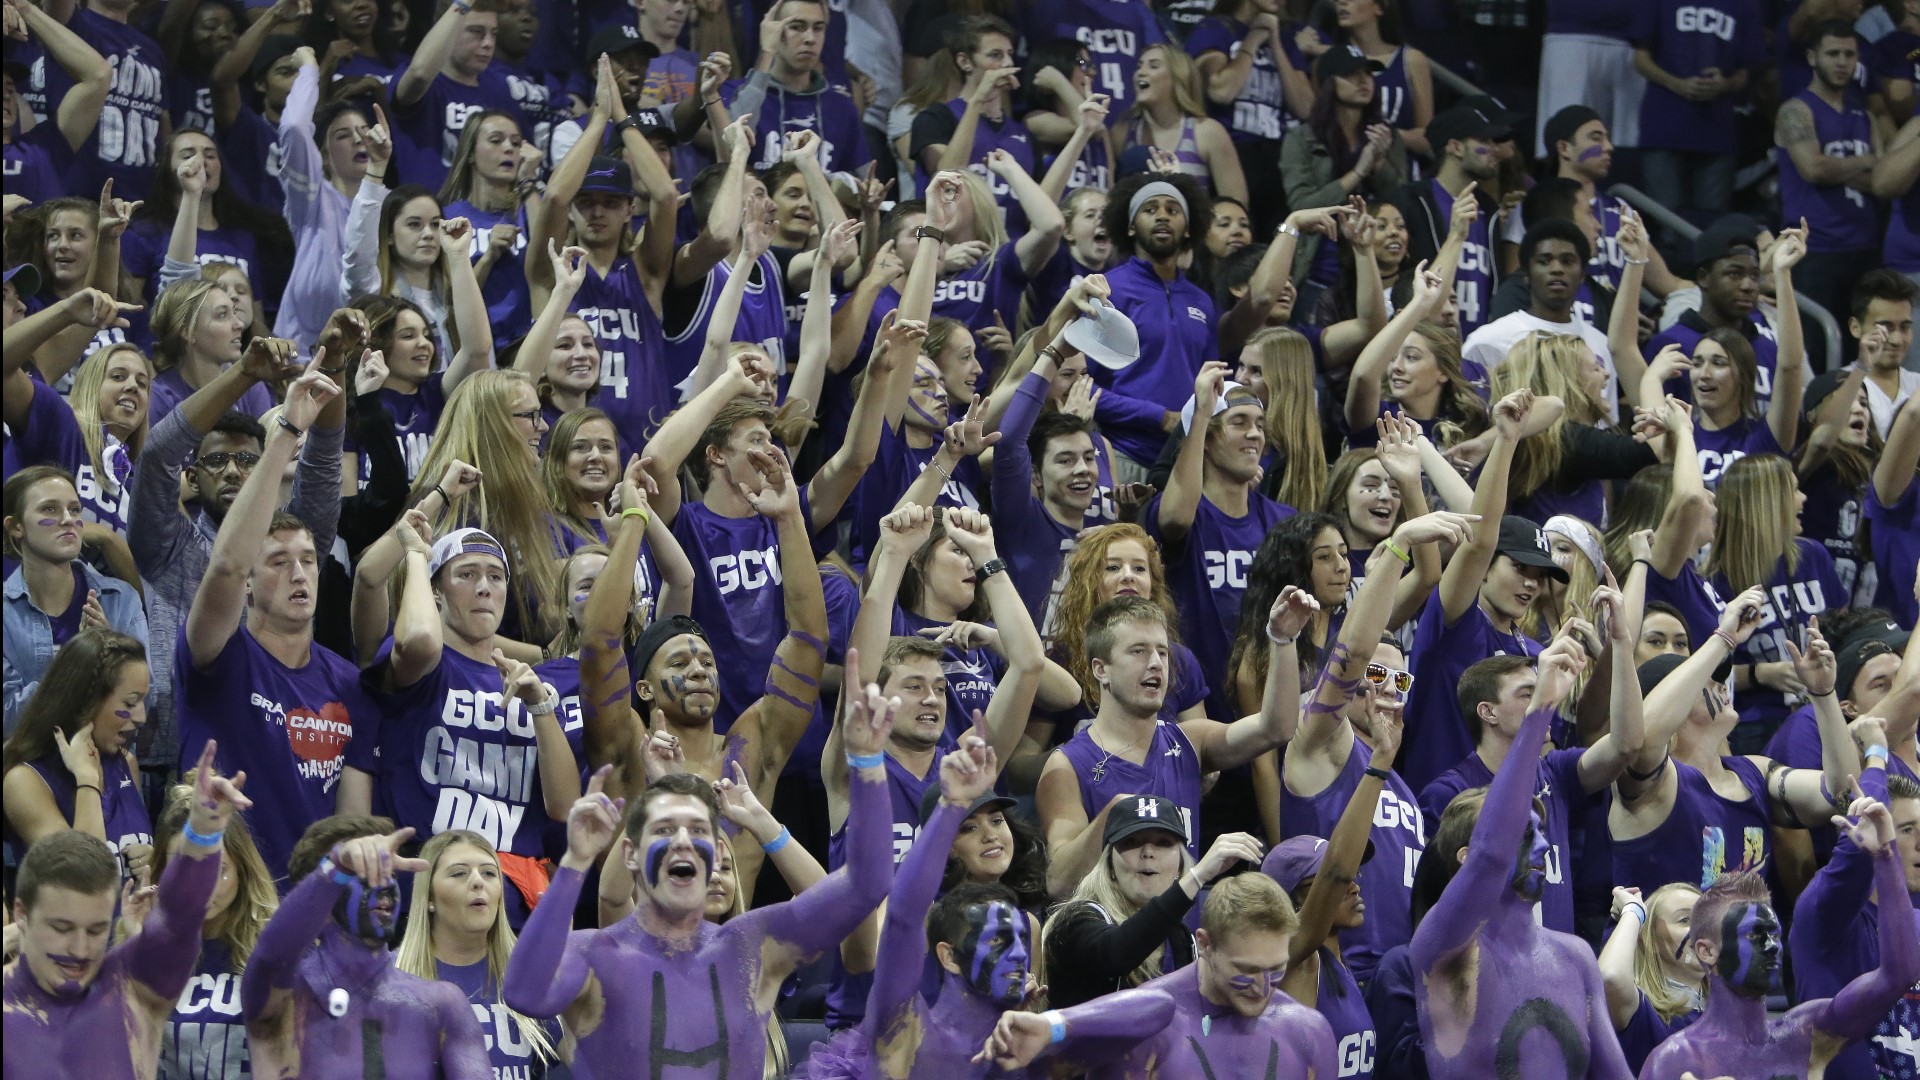 ASU and GCU to play basketball home-and-home series starting at GCU in